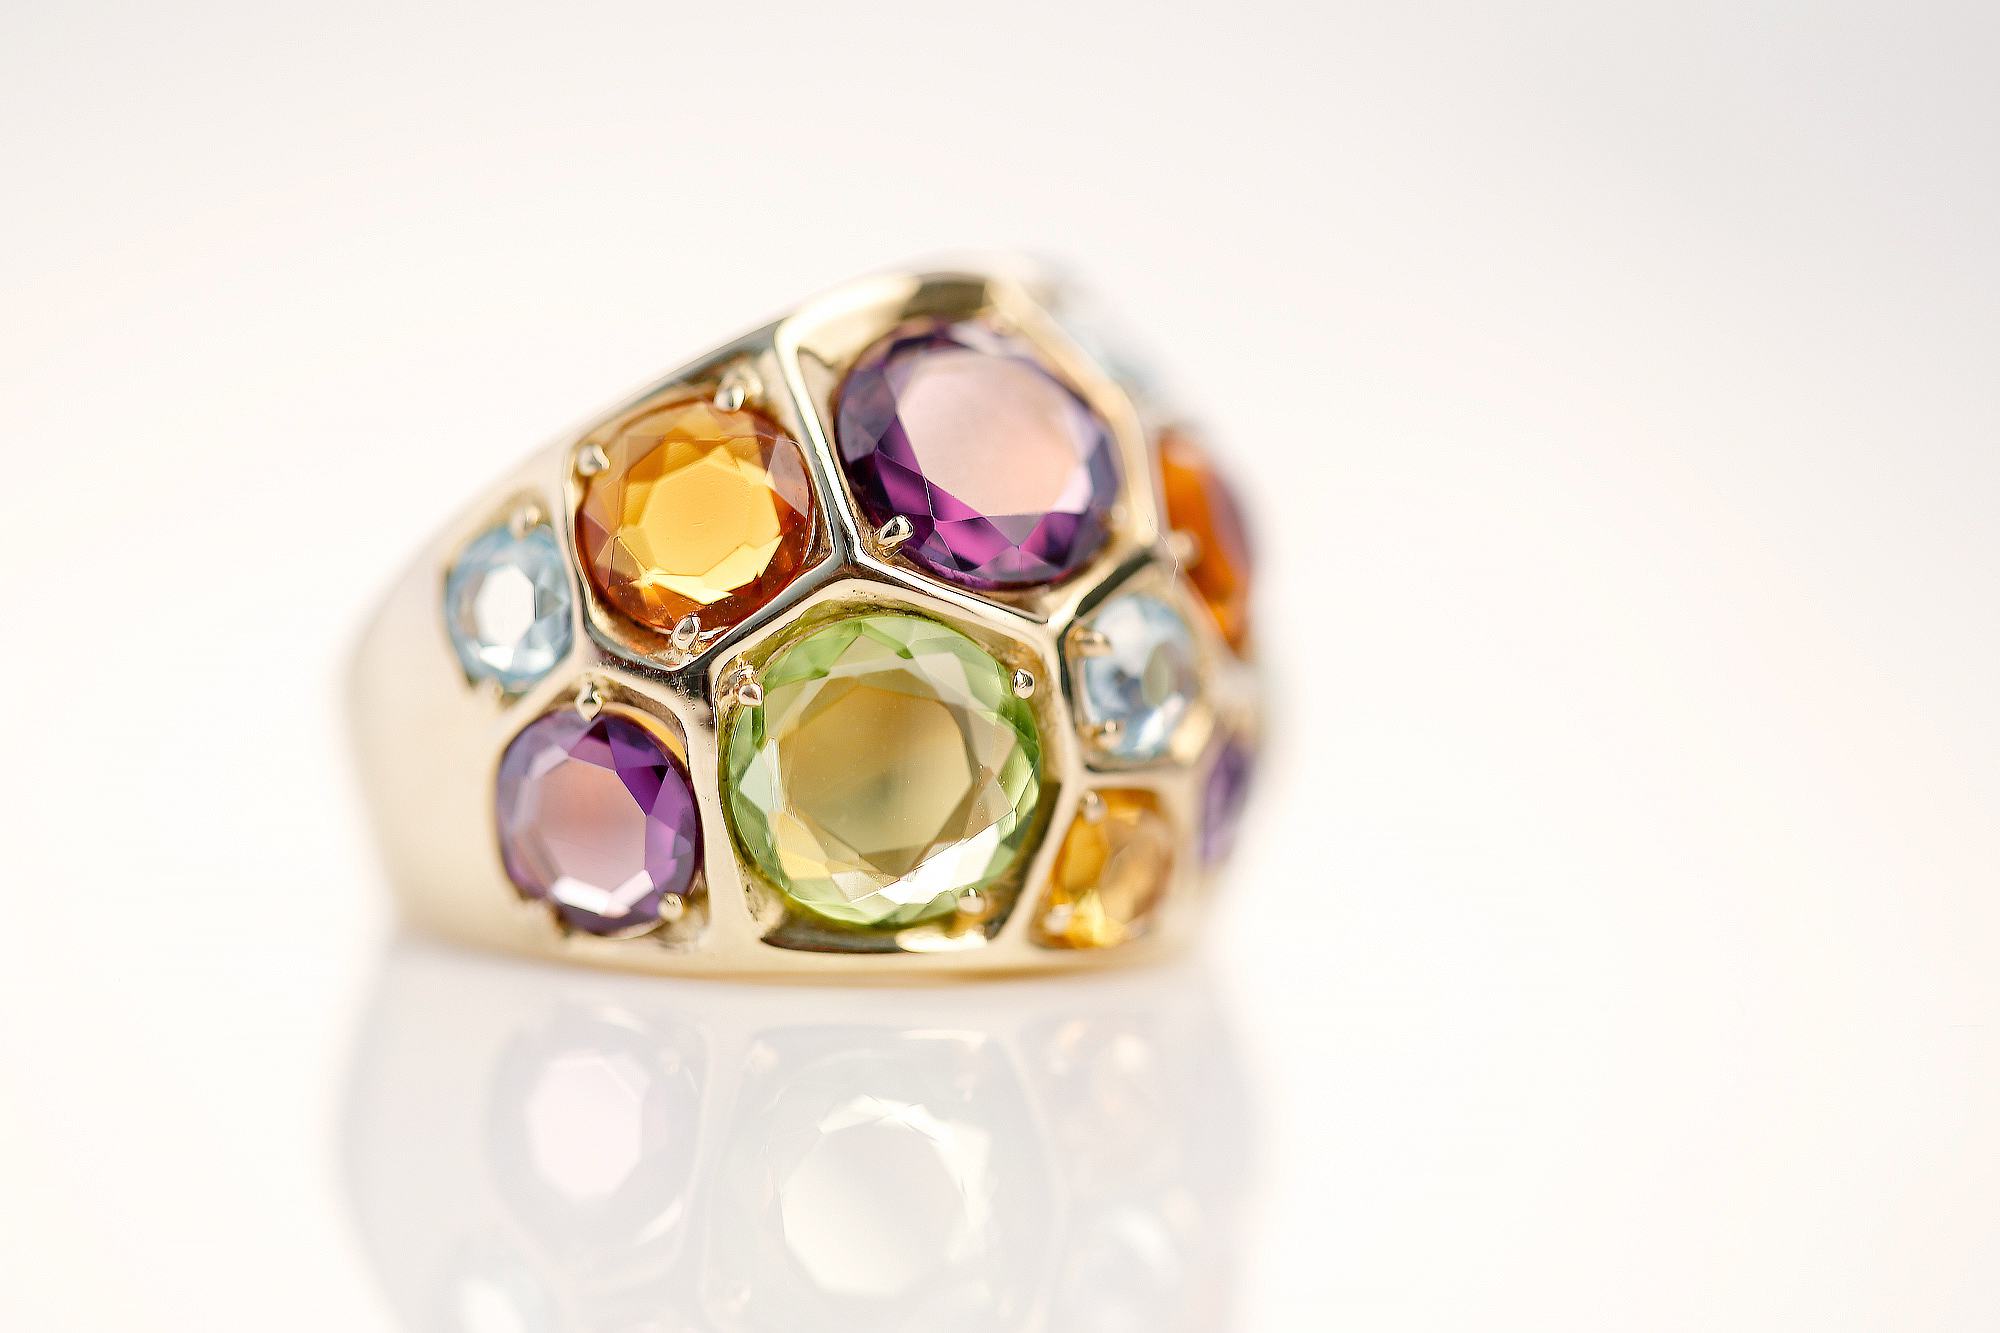 Parrini Gioielli - Gold ring with stones